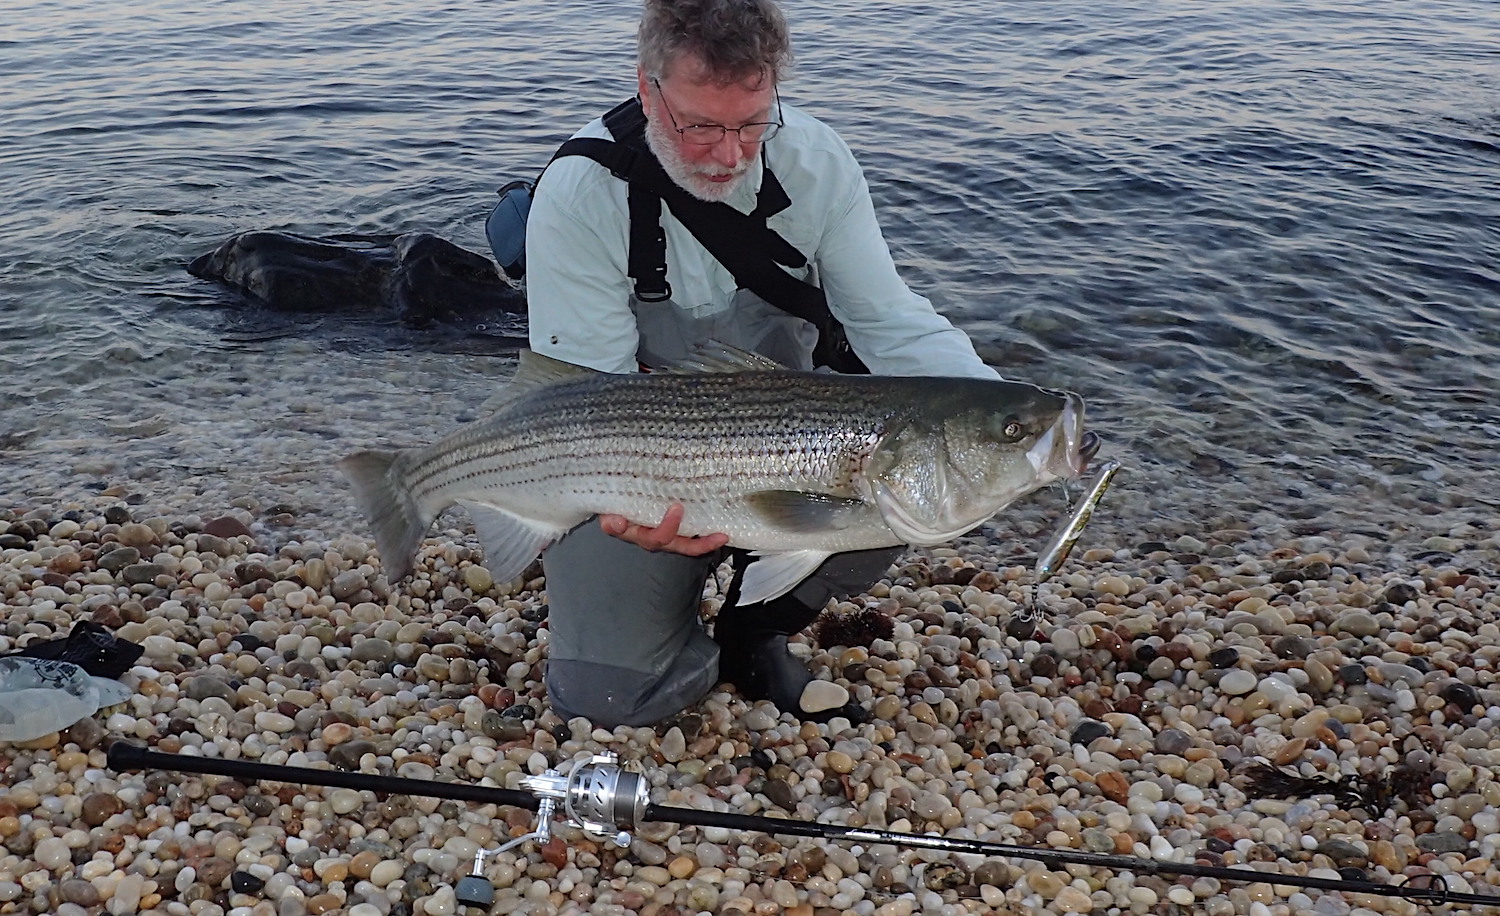 Trolling Lures for Striped Bass Fishing